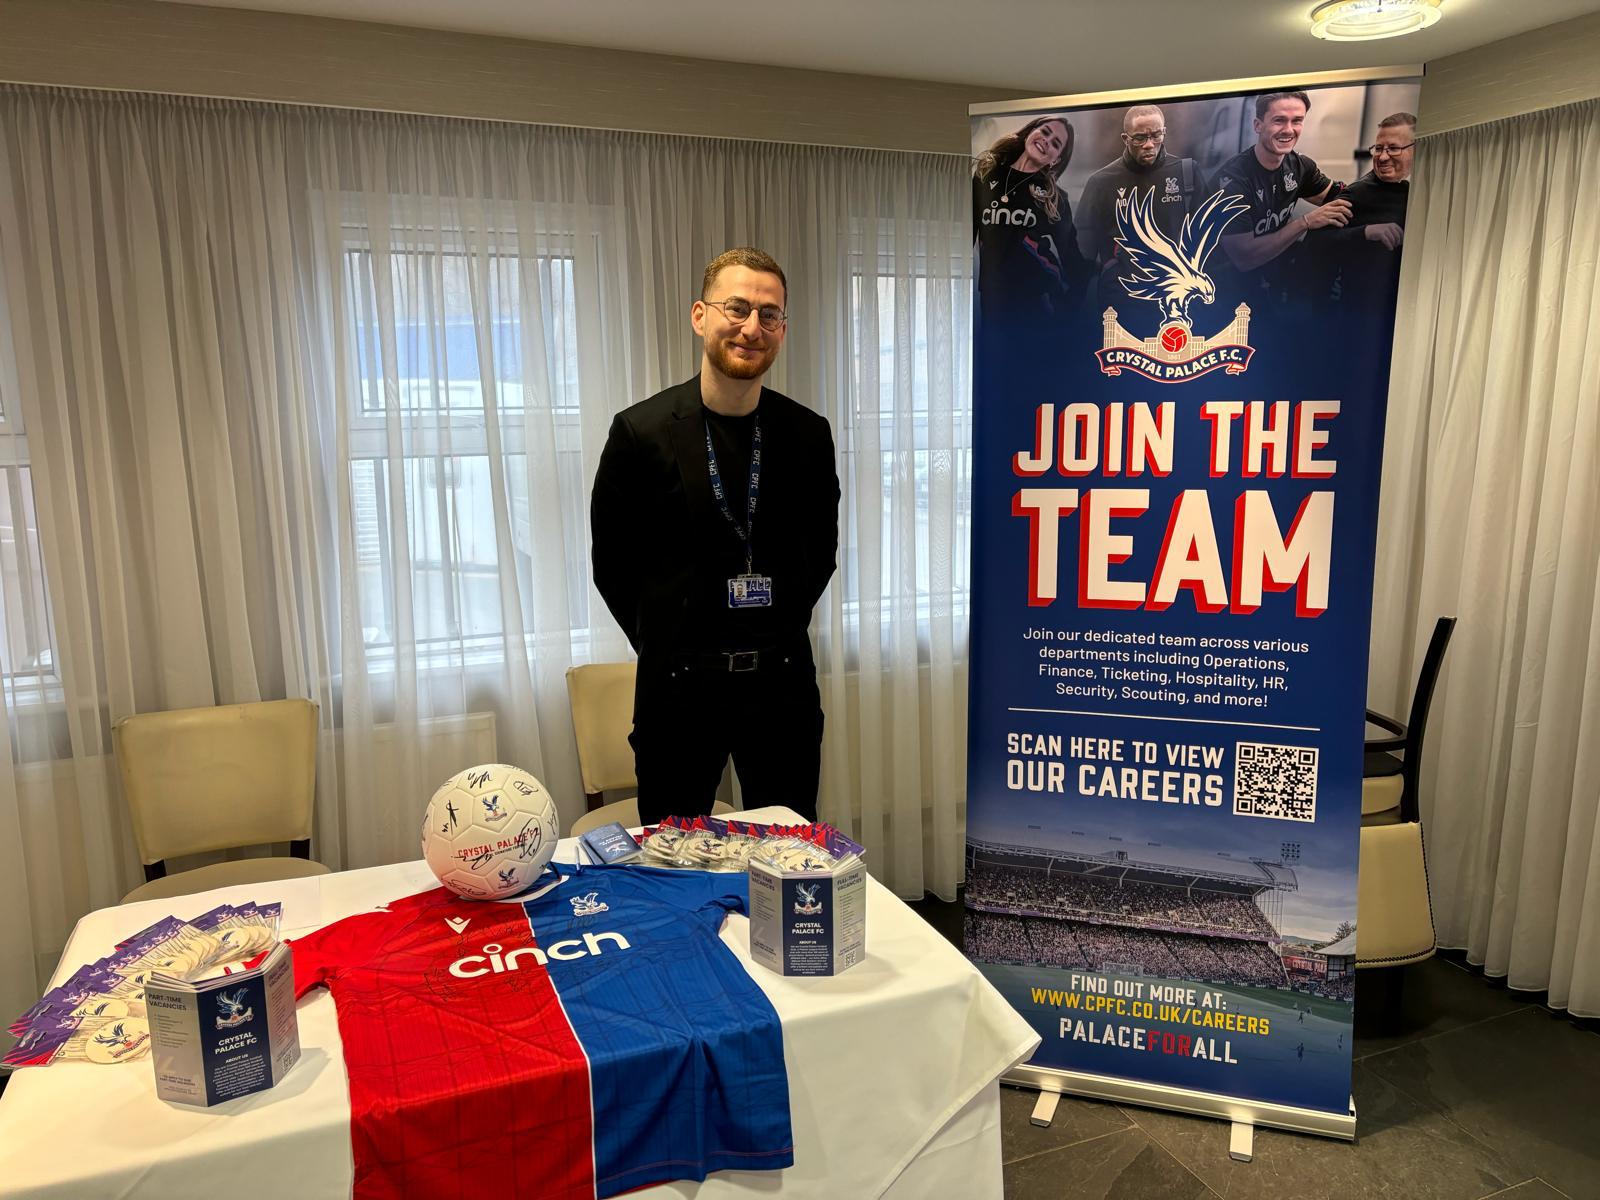 CPFC at our event in South London